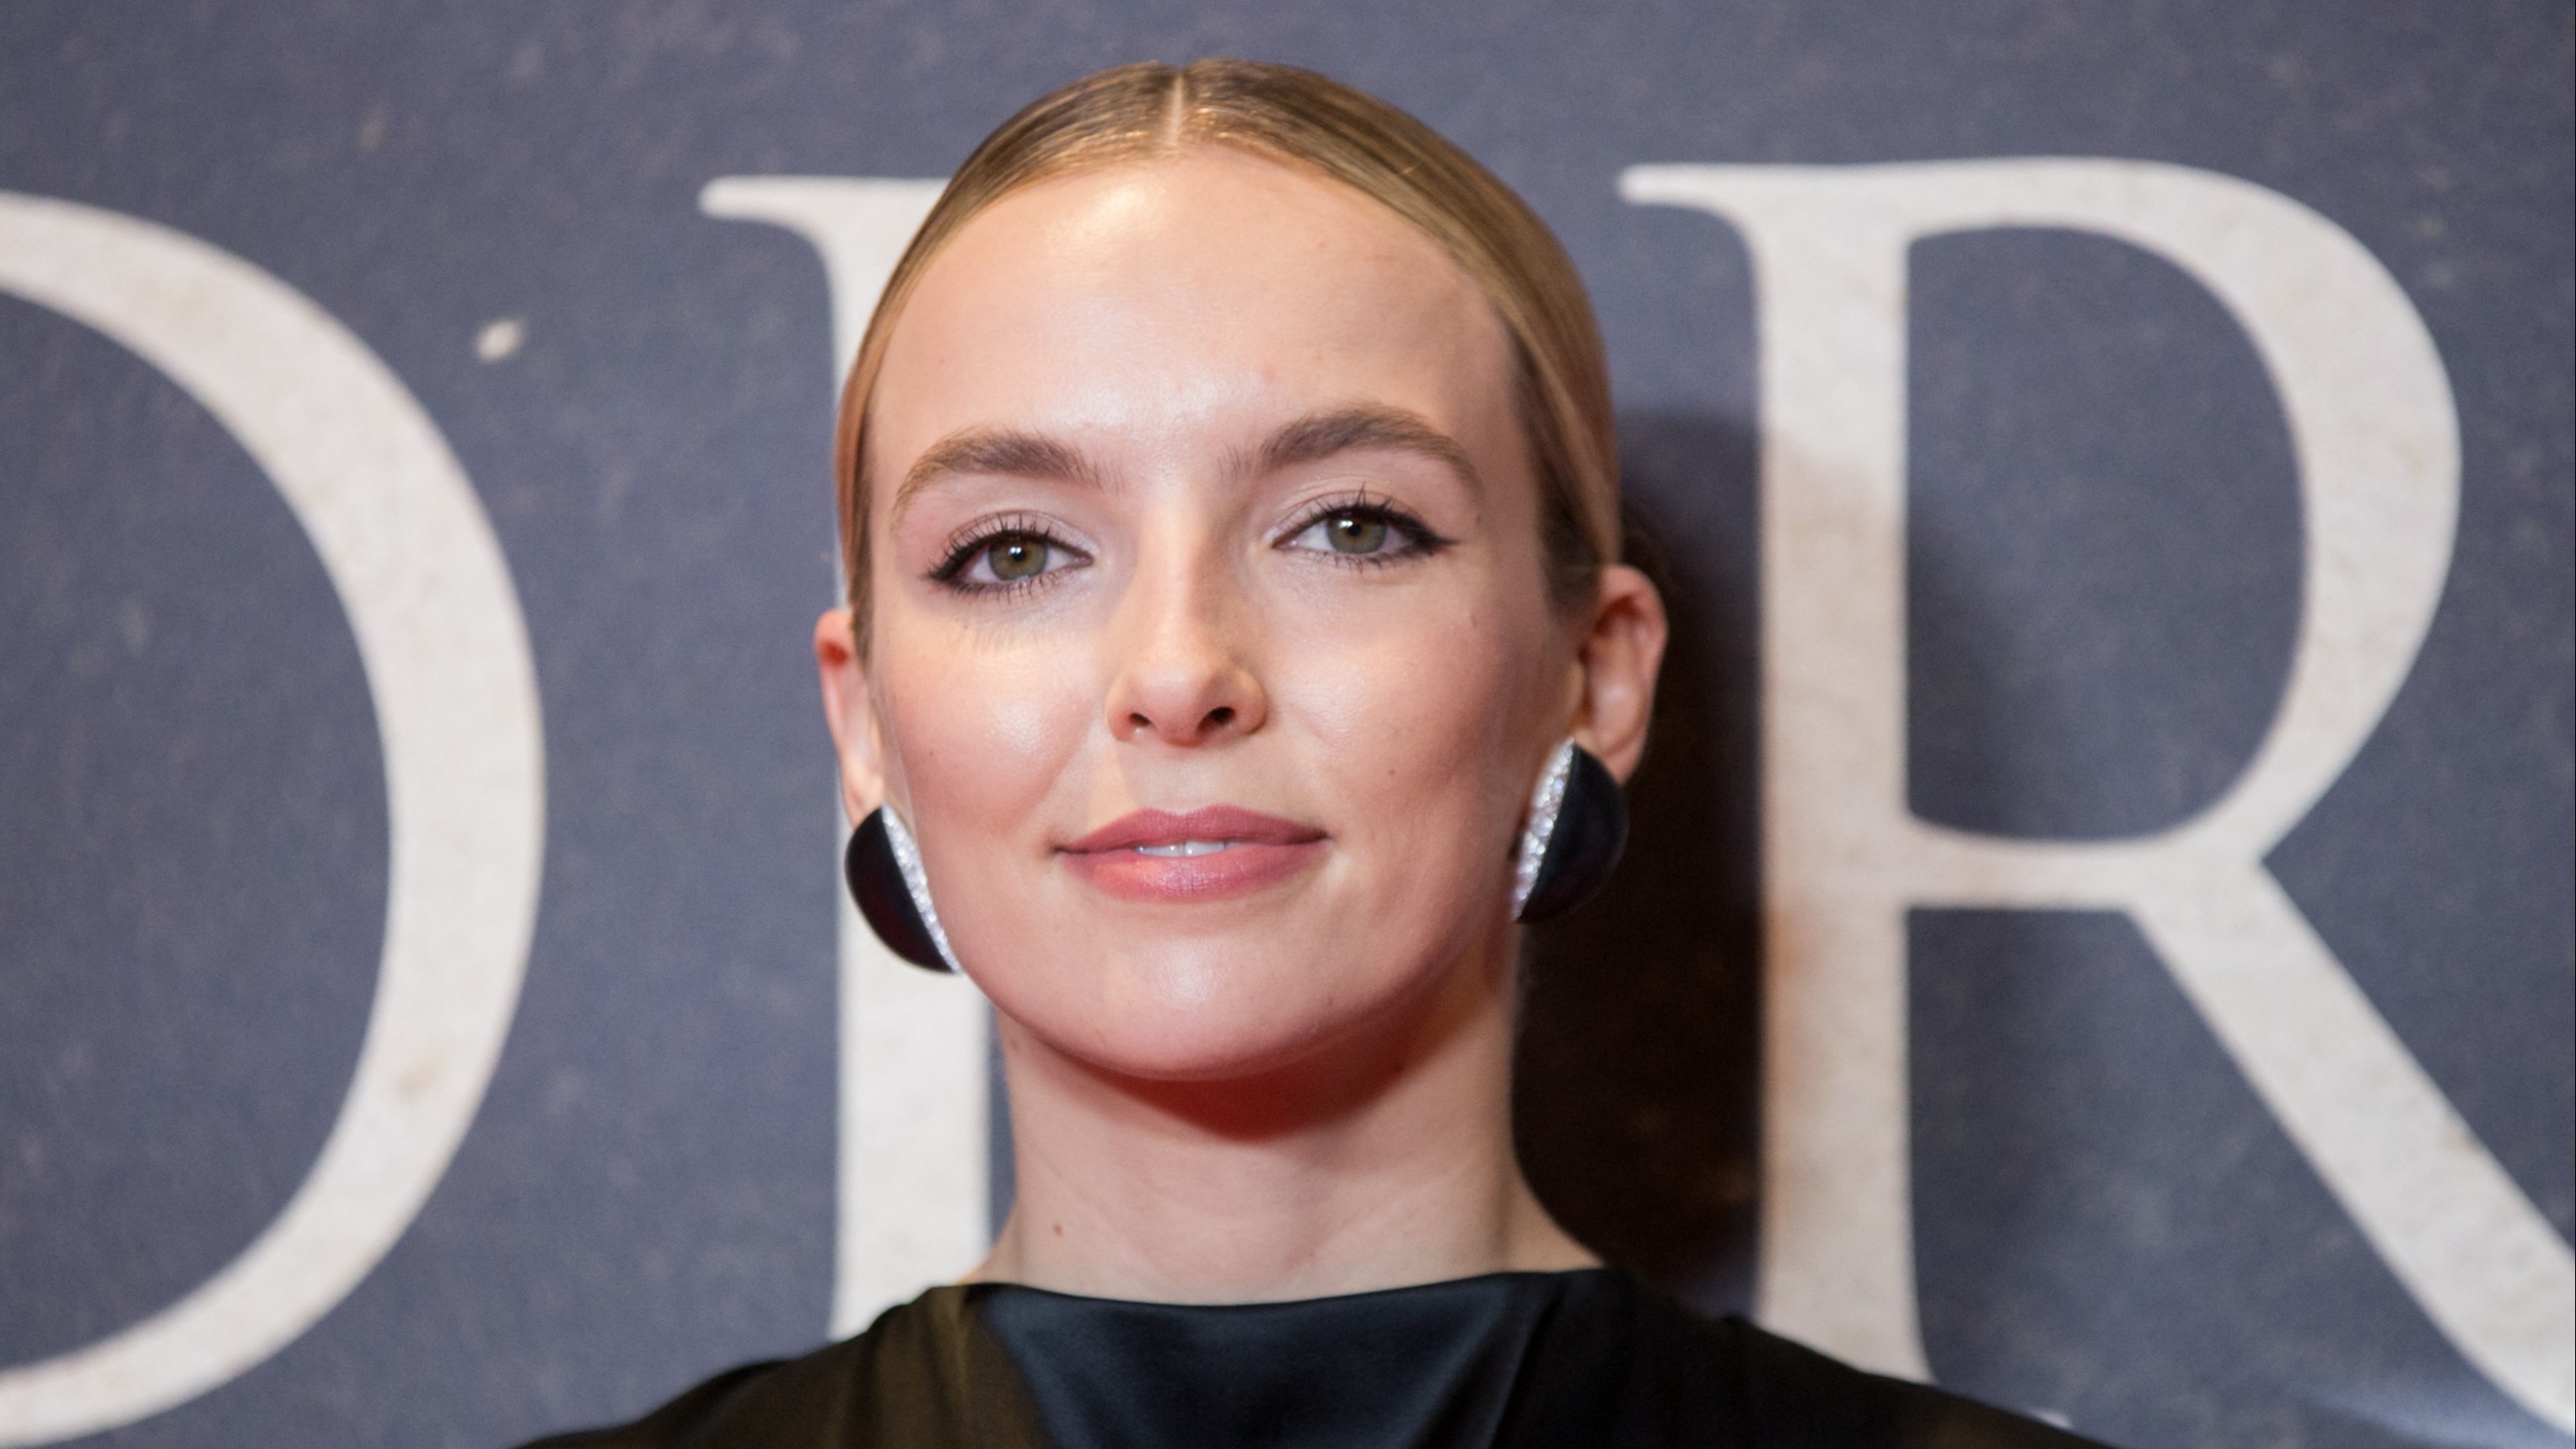 Liverpool actor Jodie Comer most beautiful woman in world according to science ITV News Granada picture